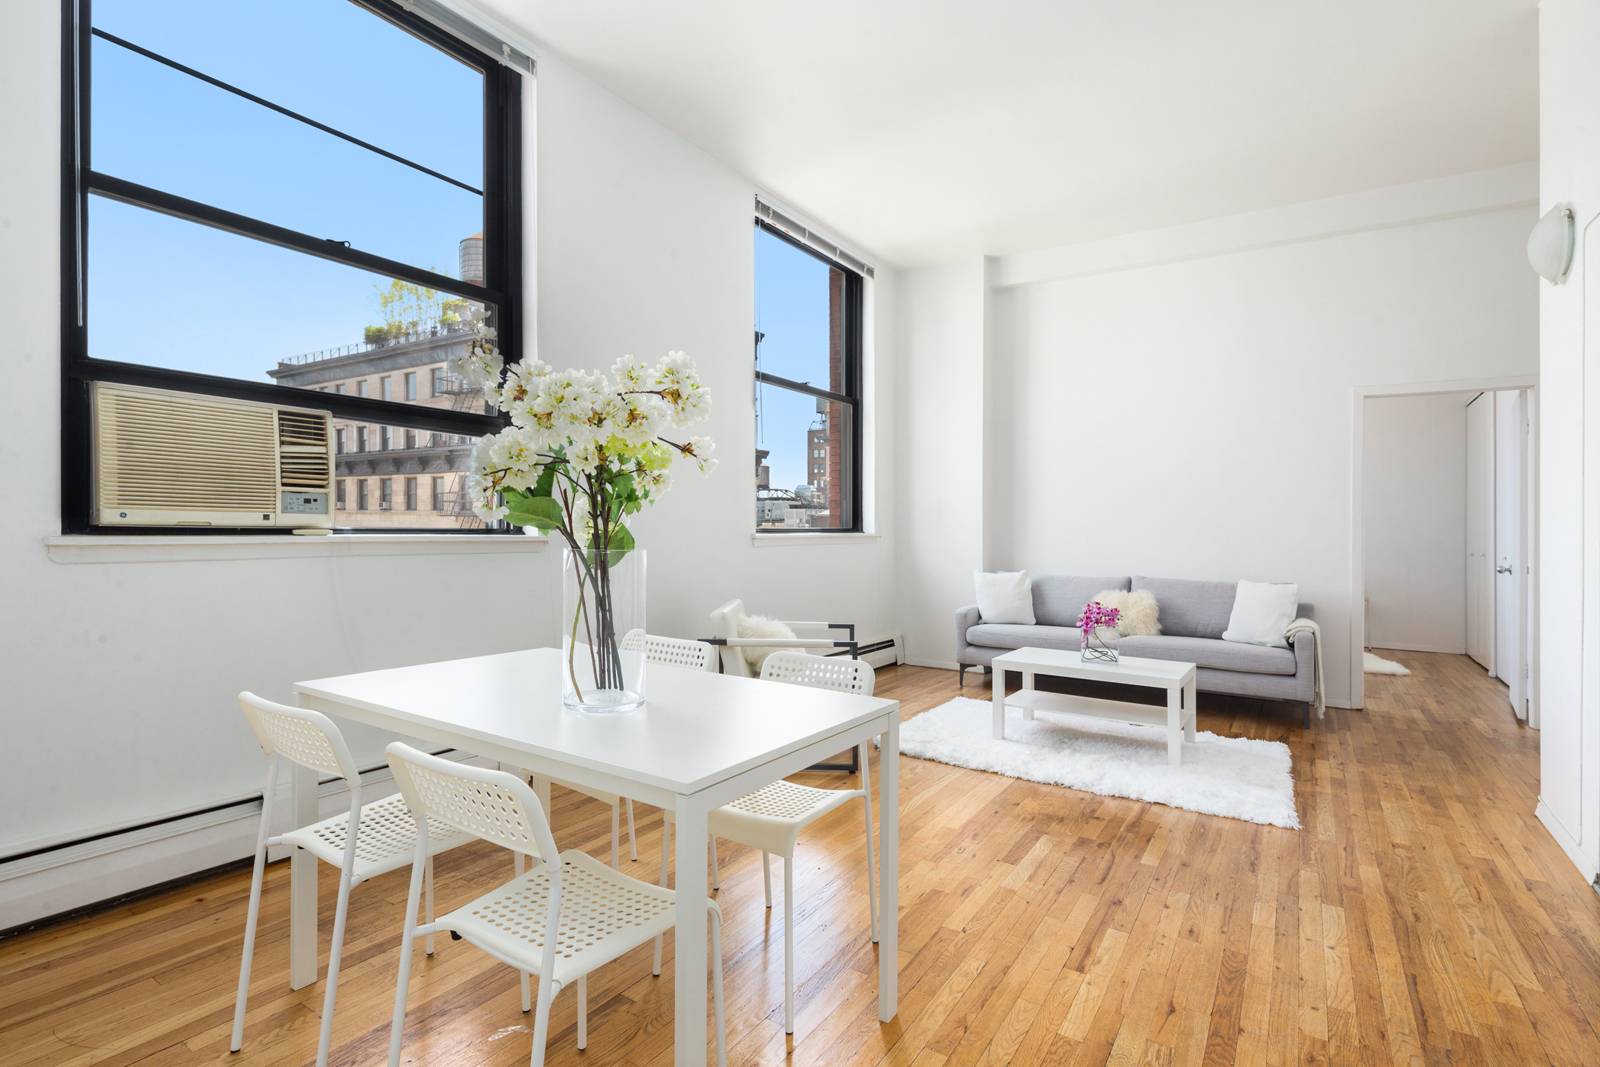 Sun Flooded Renovated One bedroom loft with massive windows and 11 ft ceilings in a full service iconic building in Noho Greenwich Village.